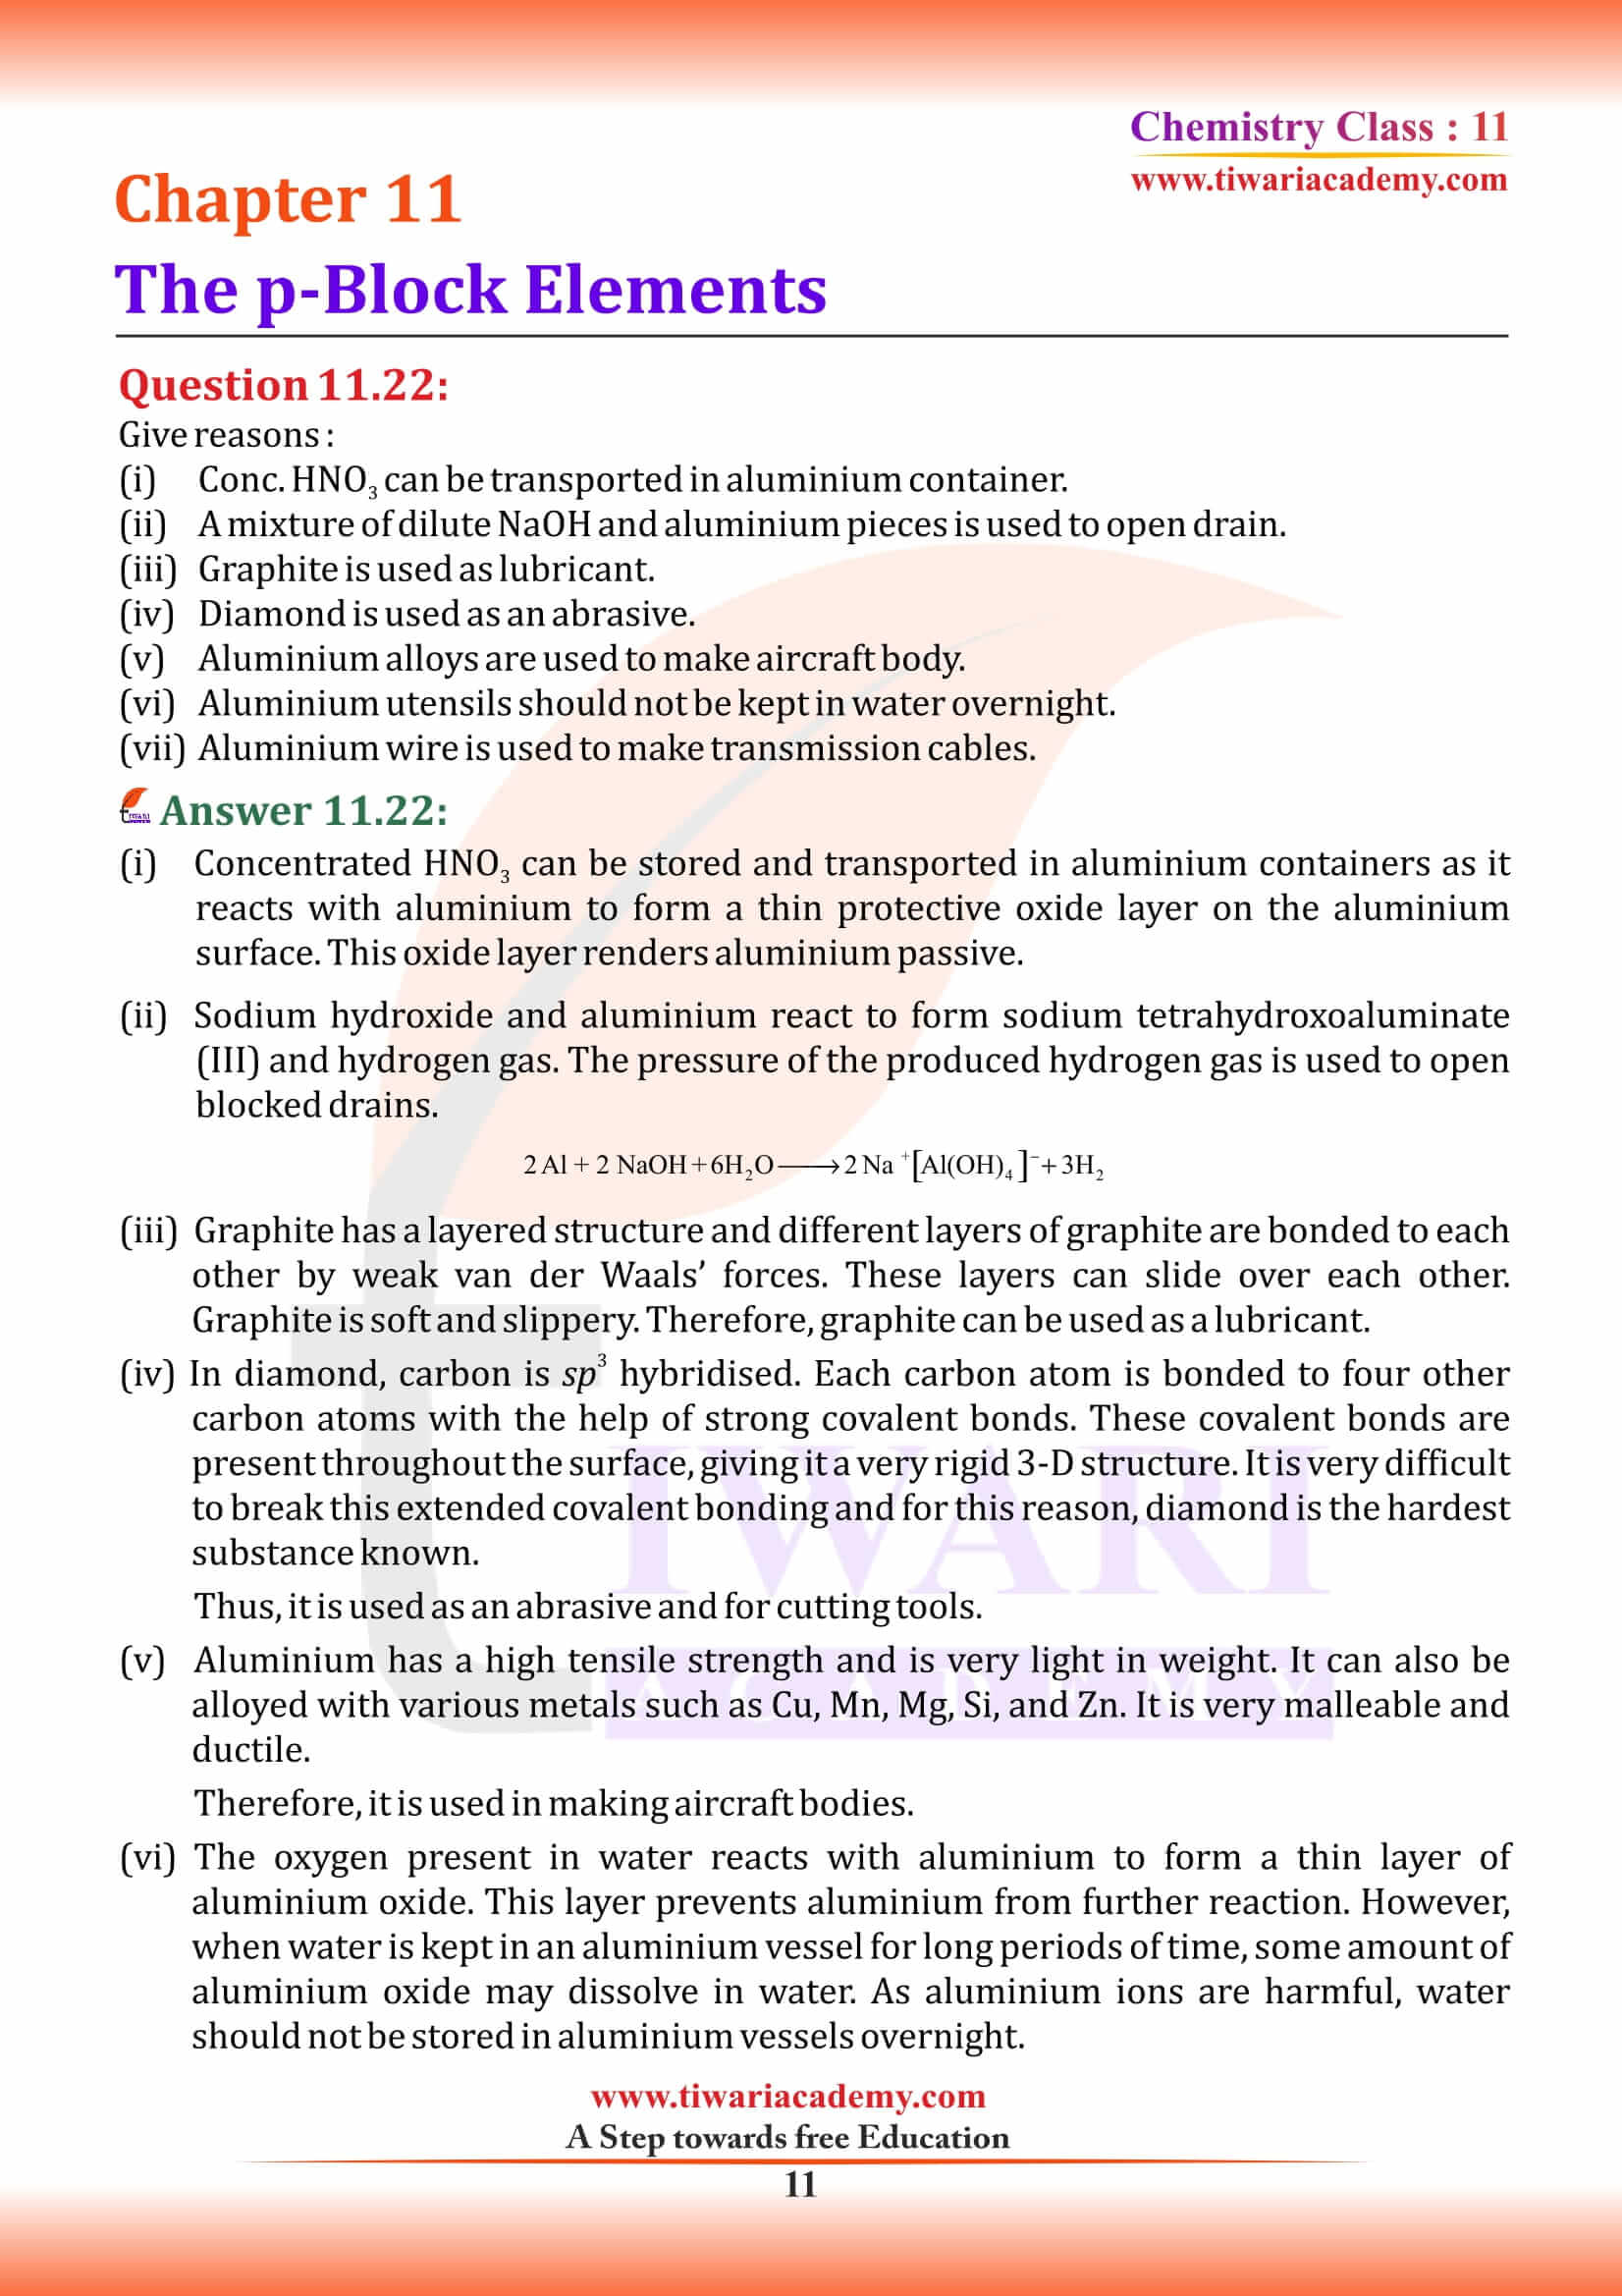 NCERT Solutions for Class 11 Chemistry Chapter 11 assignemtns